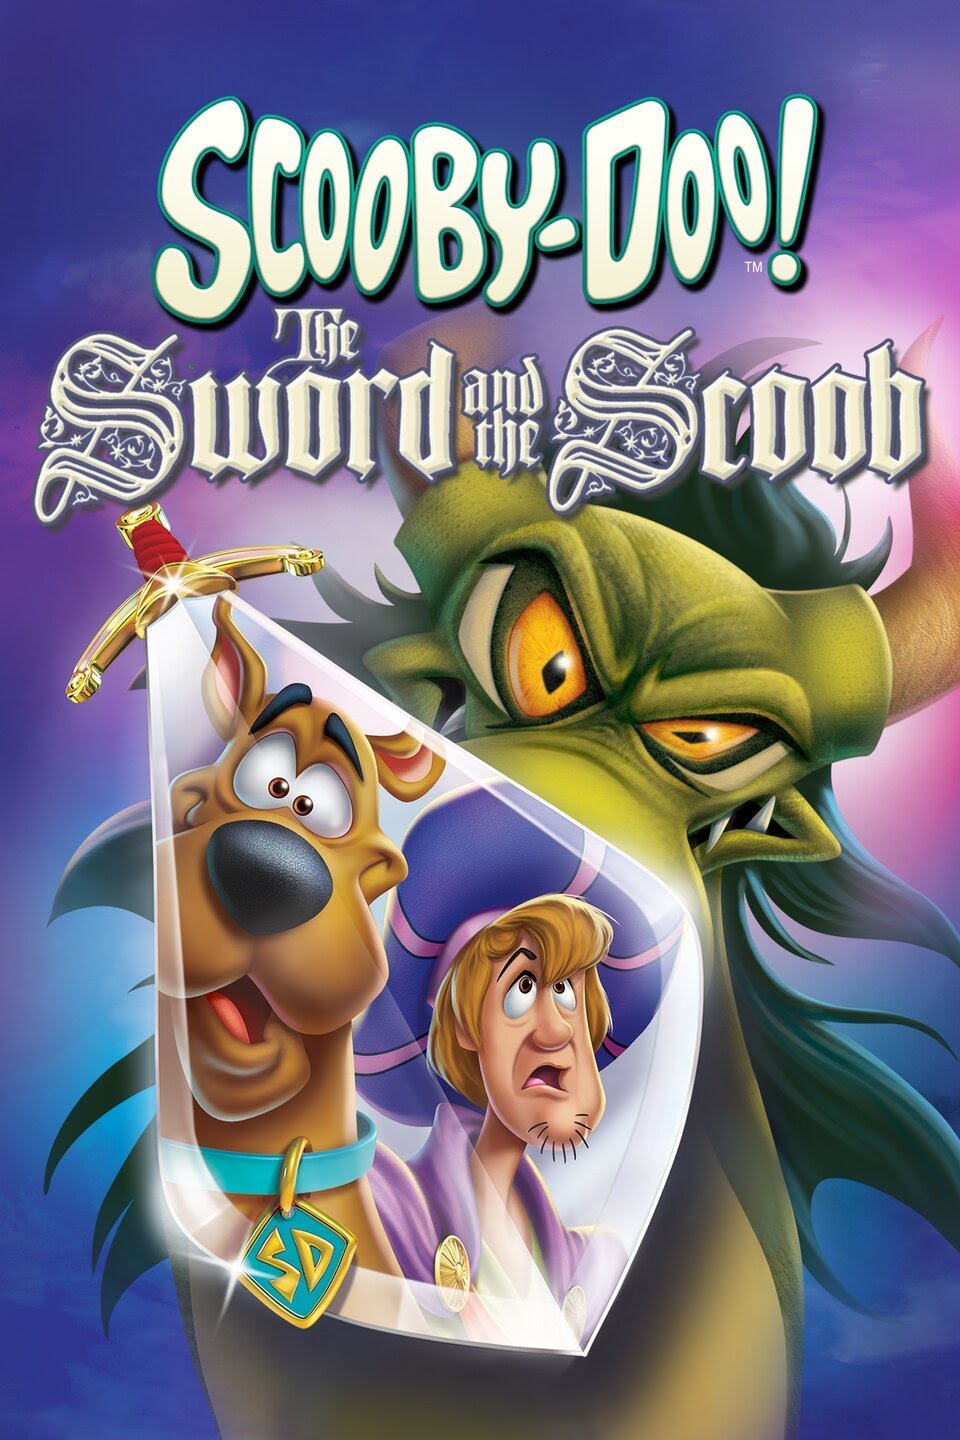 Scooby Doo and the Sword of Scoob